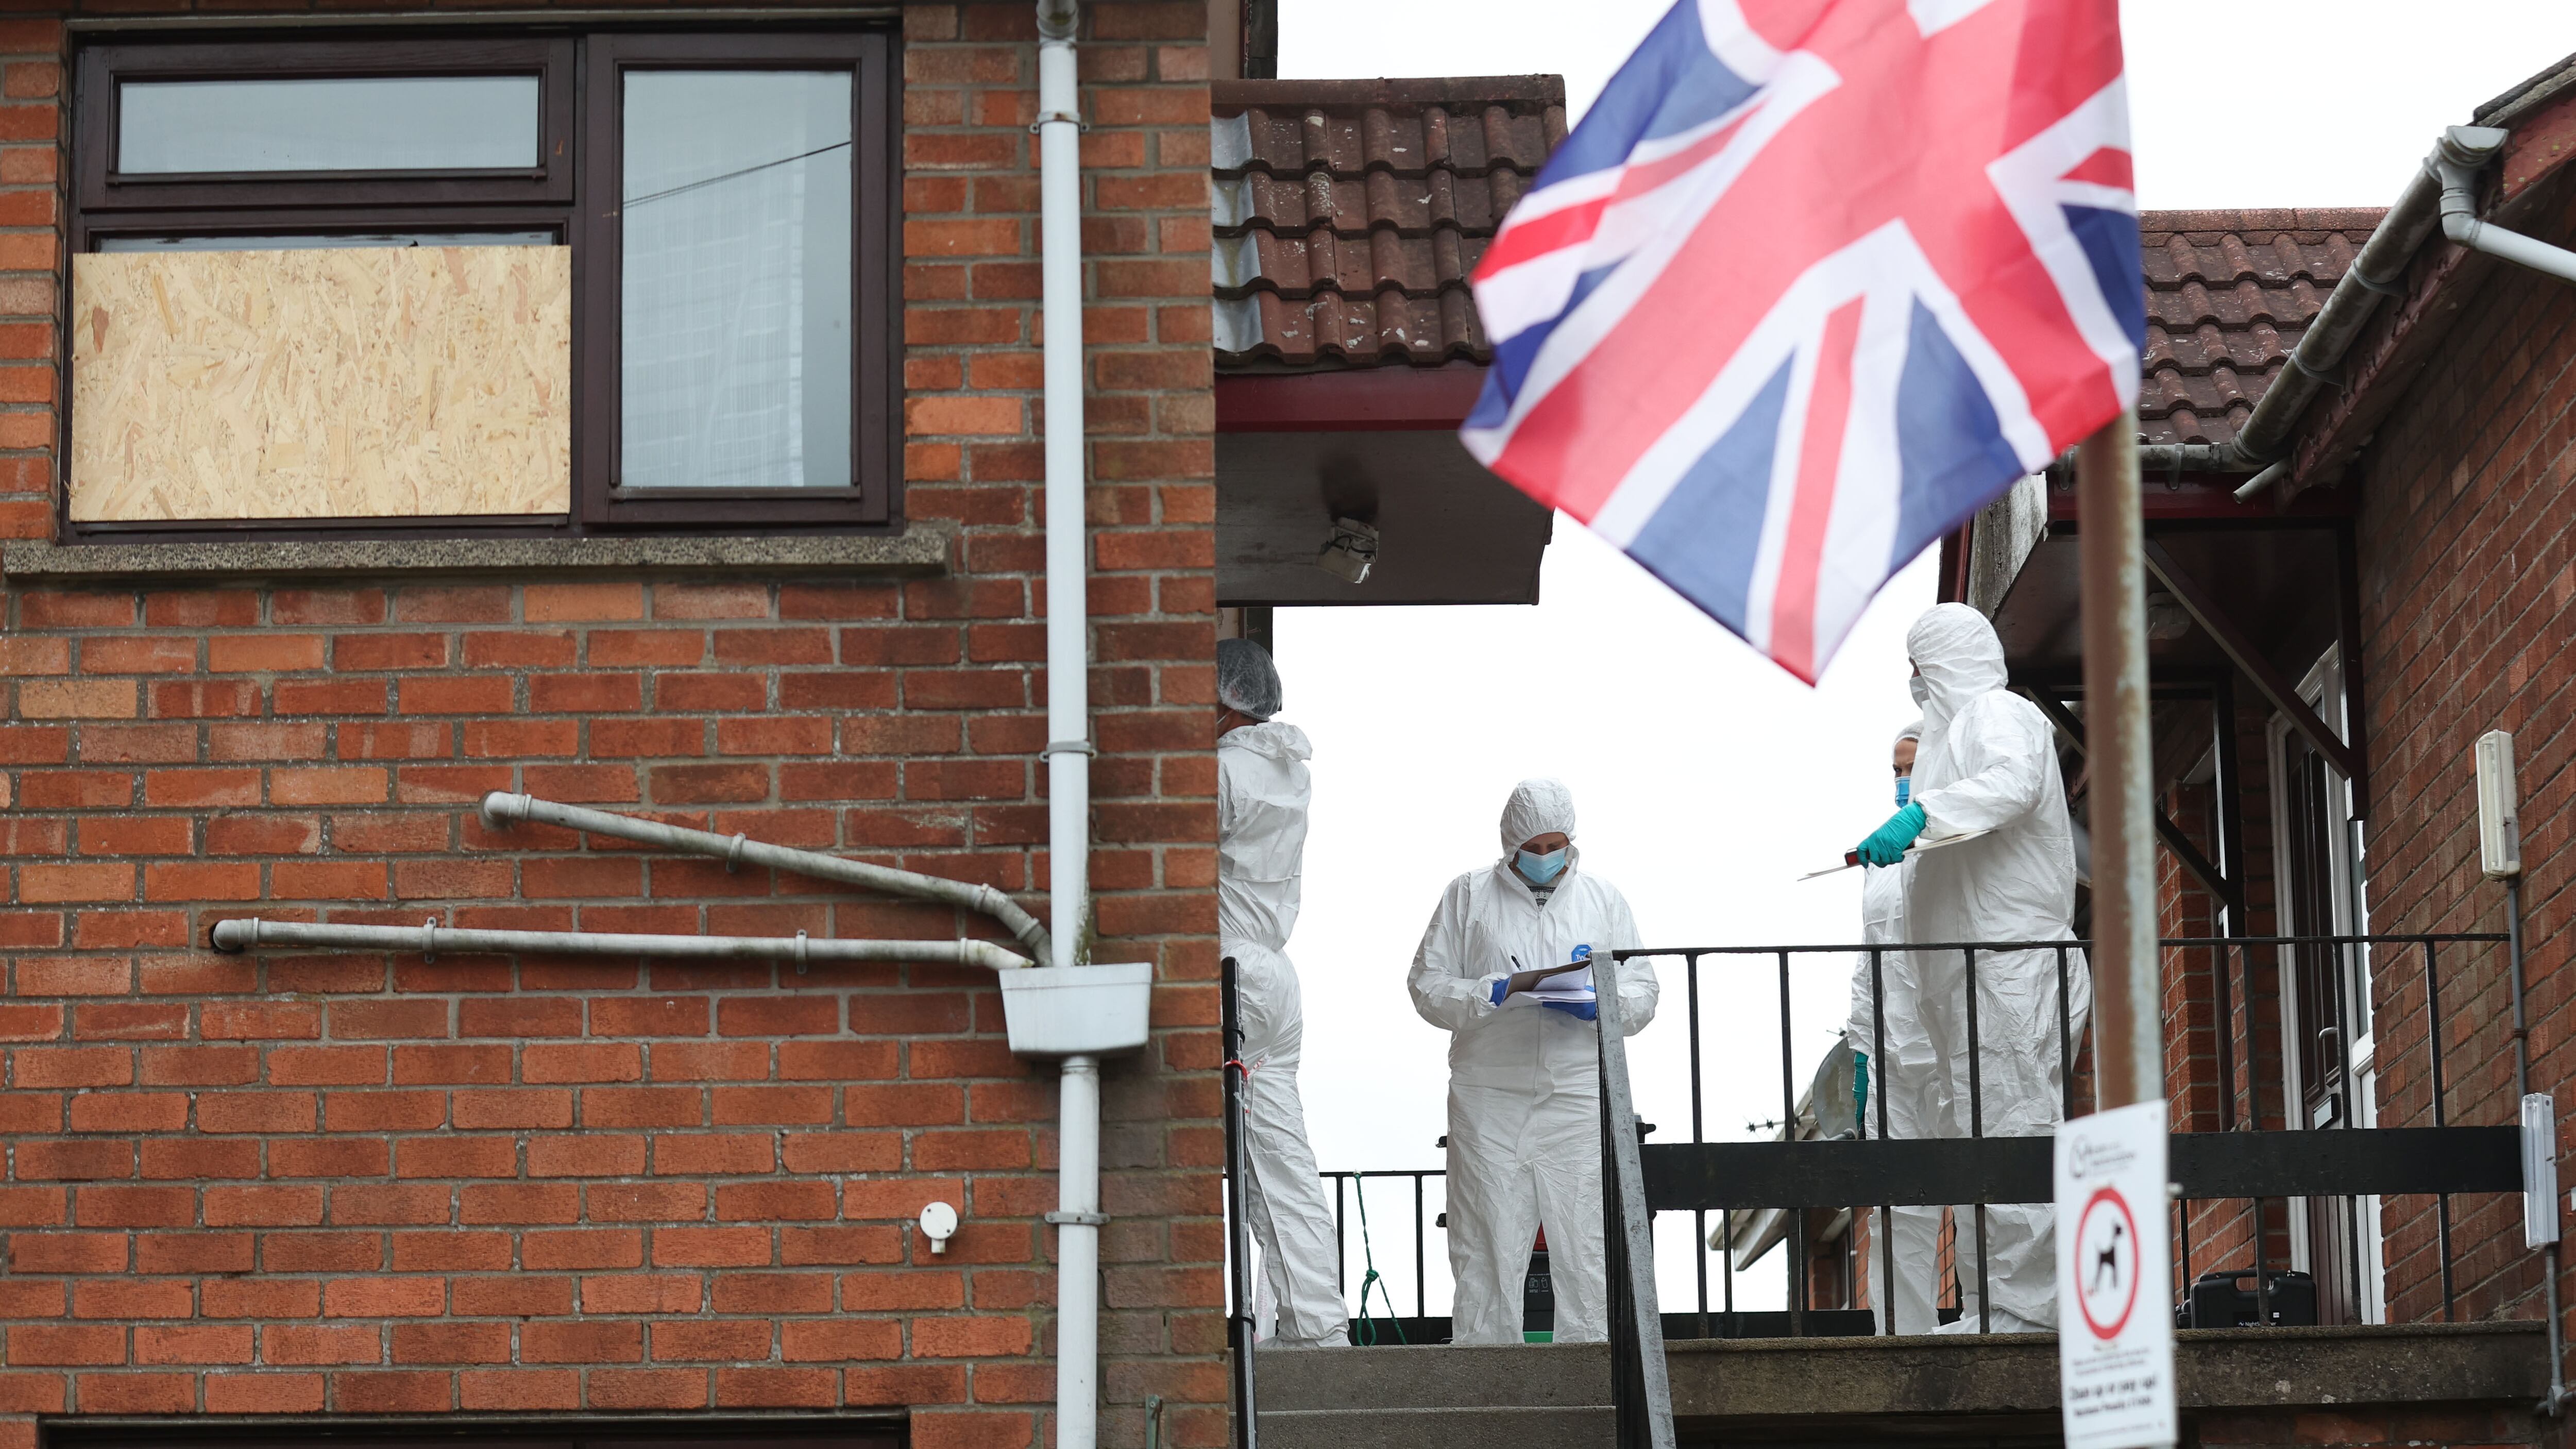 Forensics at the scene as  A man, aged in his 20s, is in a serious condition in hospital after he was found seriously injured in a property in the Queens Avenue area of Newtownabbey on Tuesday evening, 11th June.
PICTURE COLM LENAGHAN